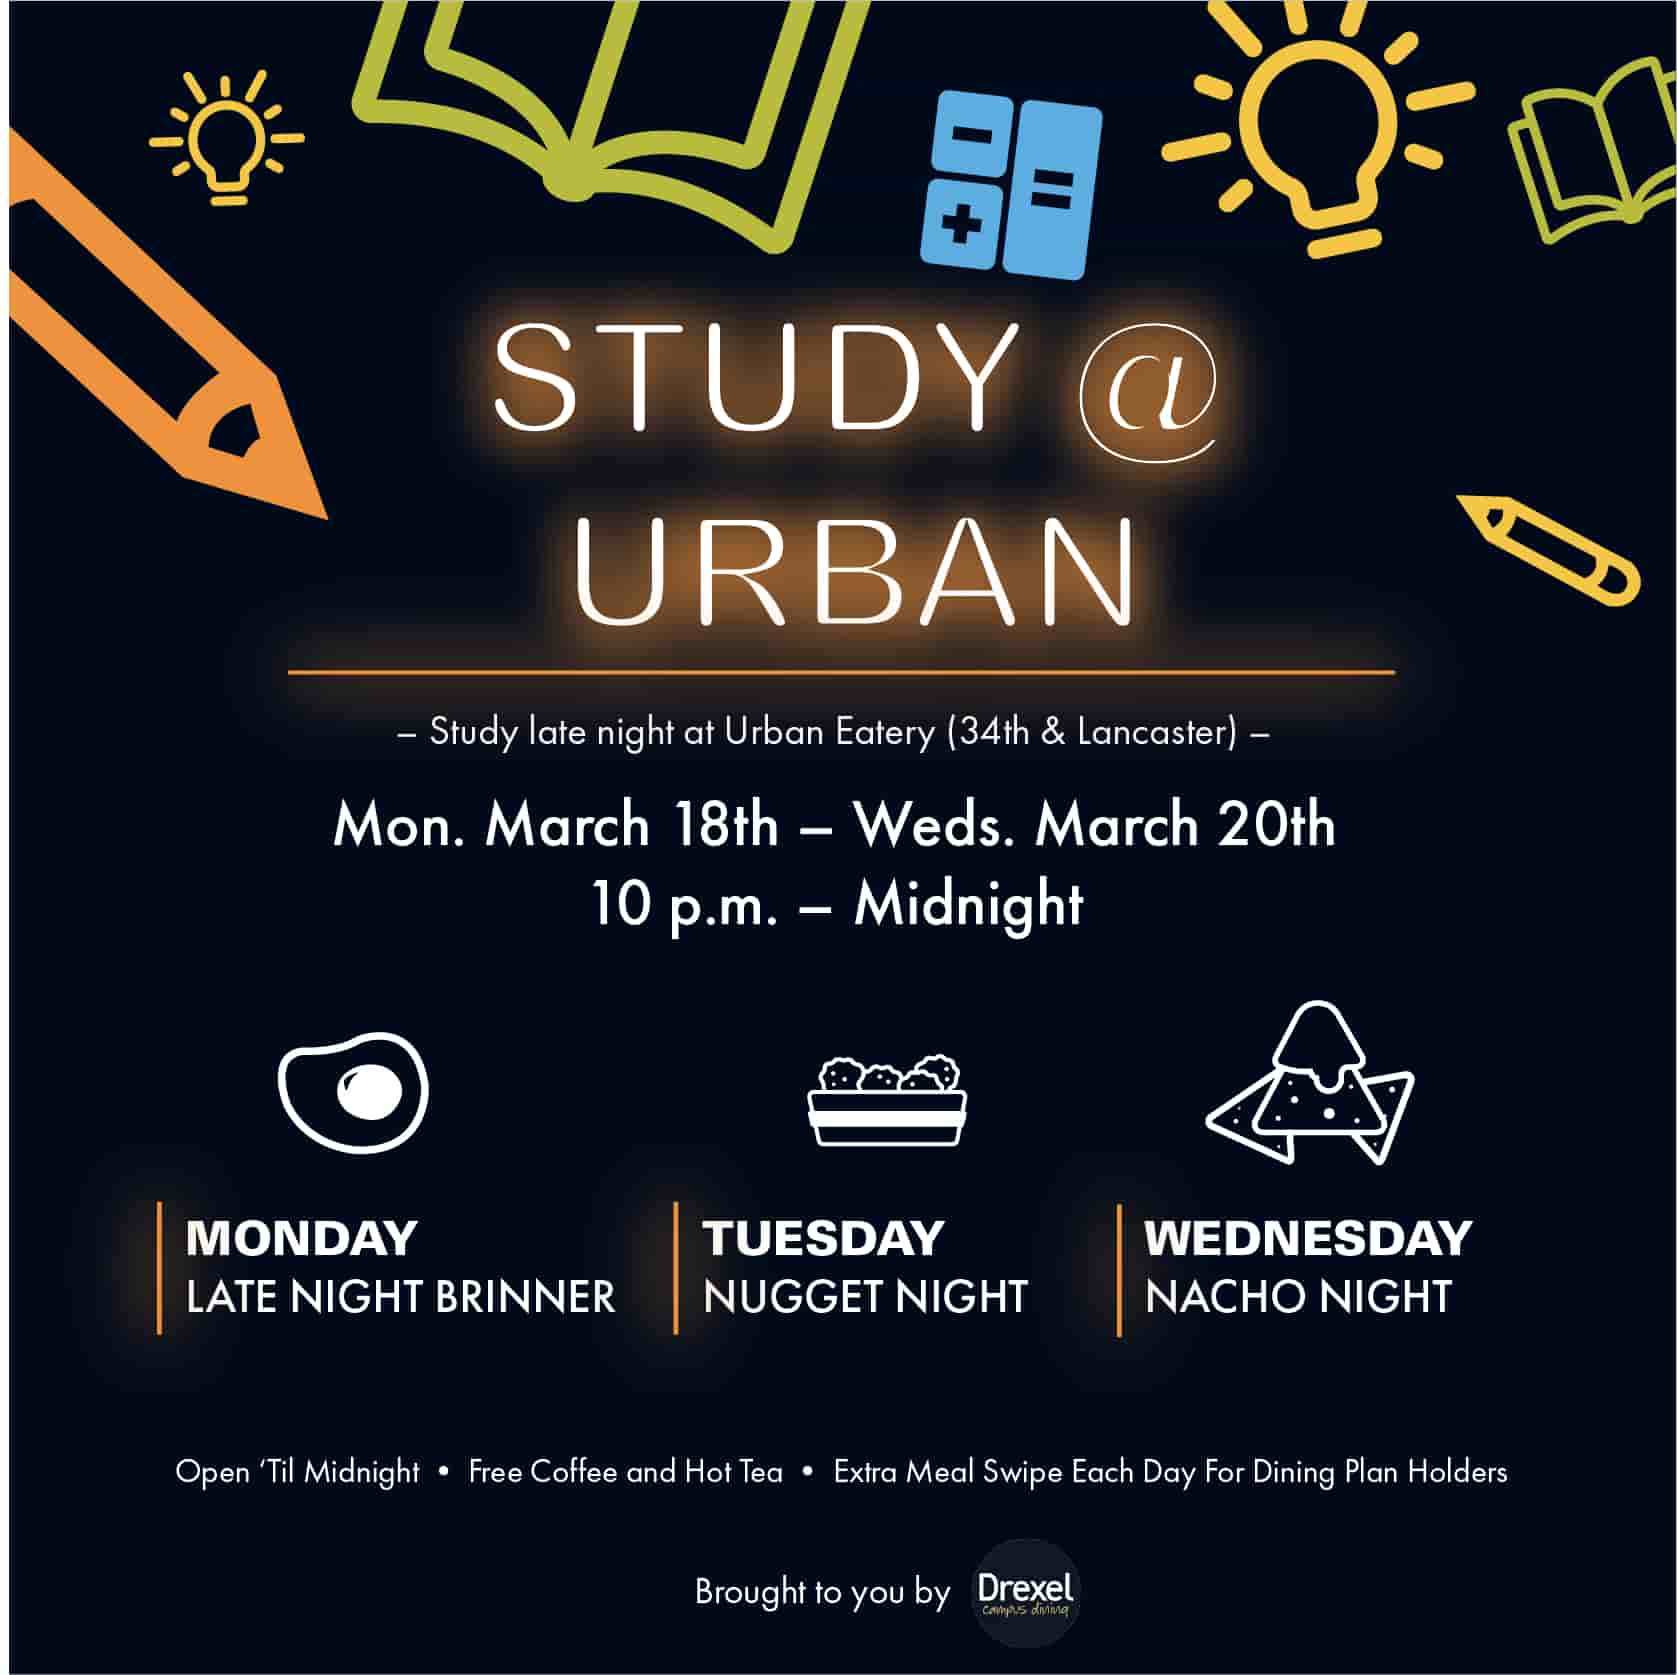 Snack and Study at Urban Eatery